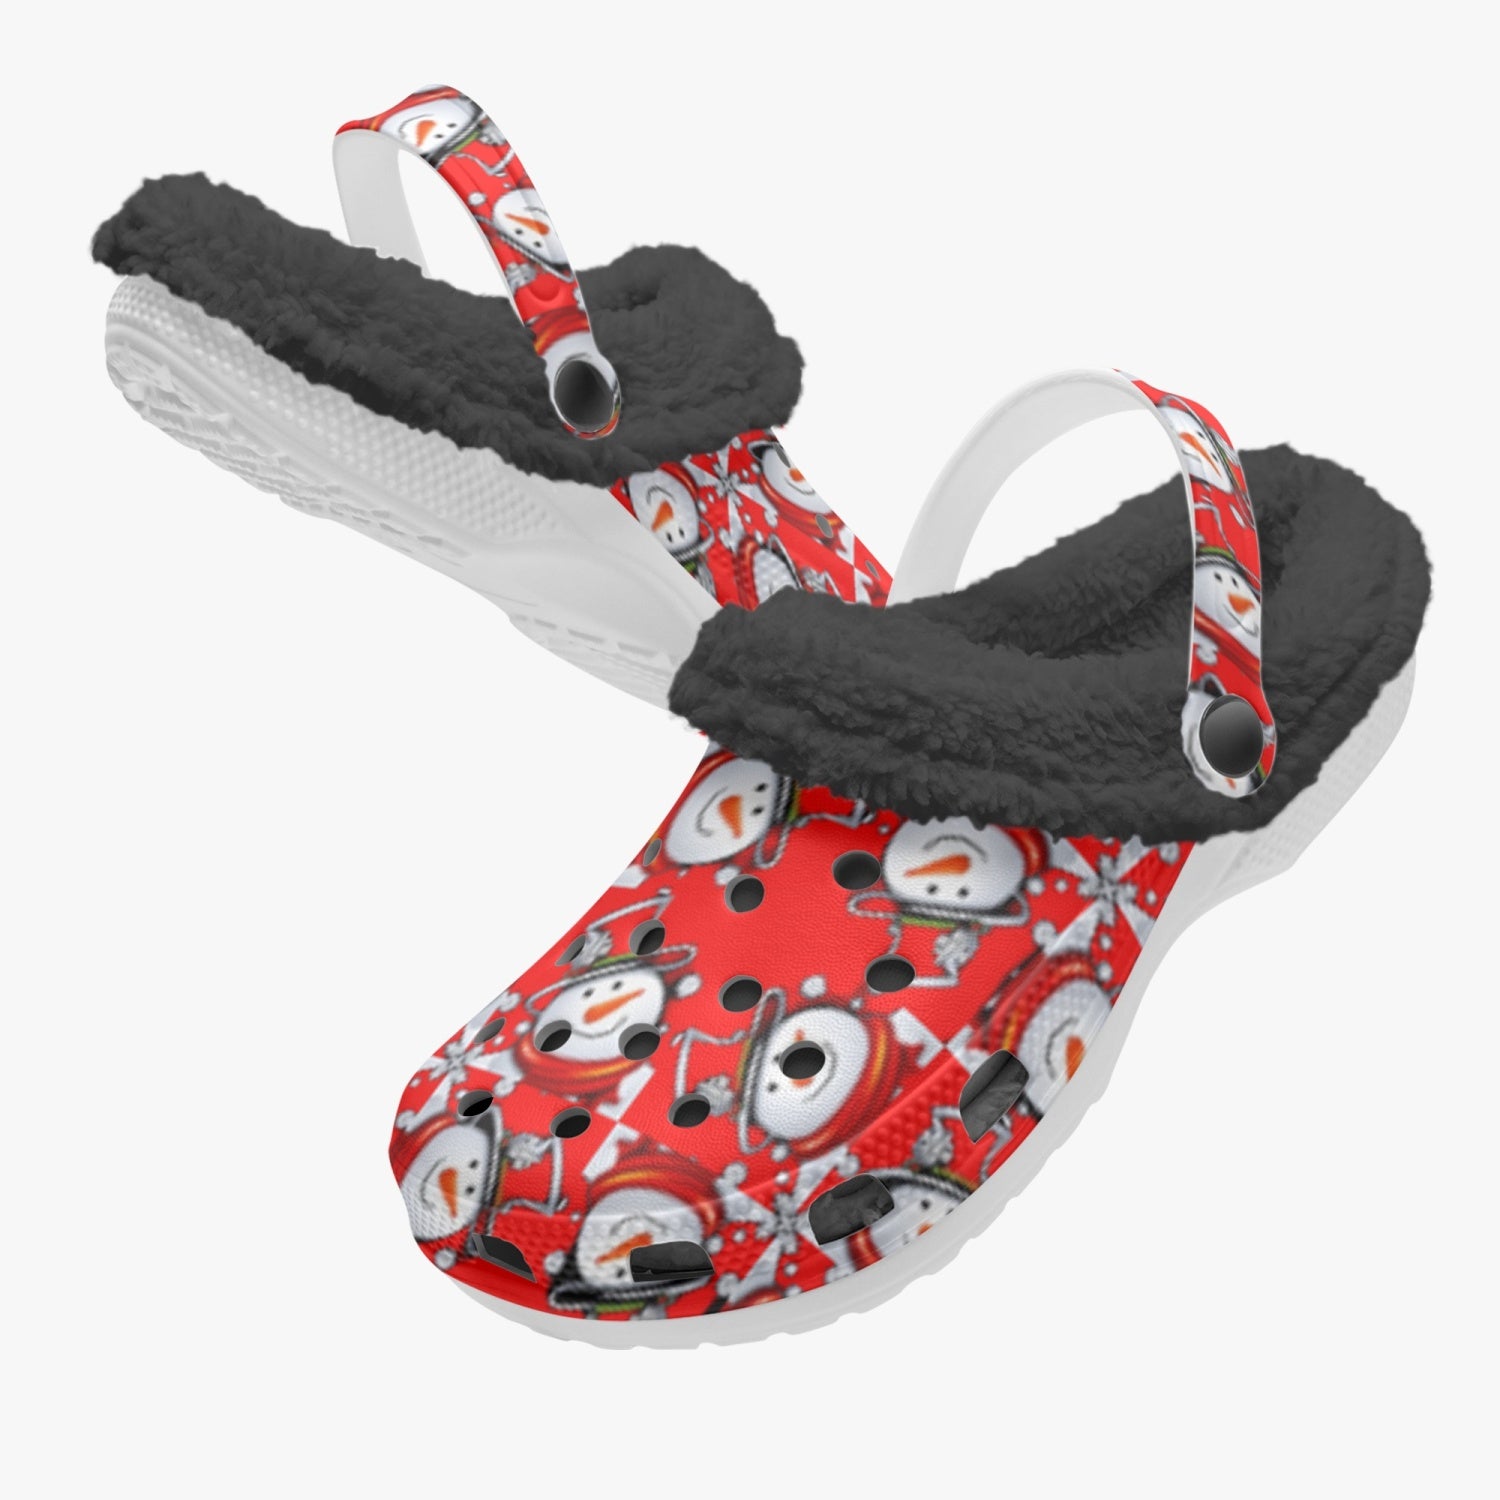 Snow Man's Delight Fuzzy Lined Christmas Clogs - 2 colors - women's clogs at TFC&H Co.